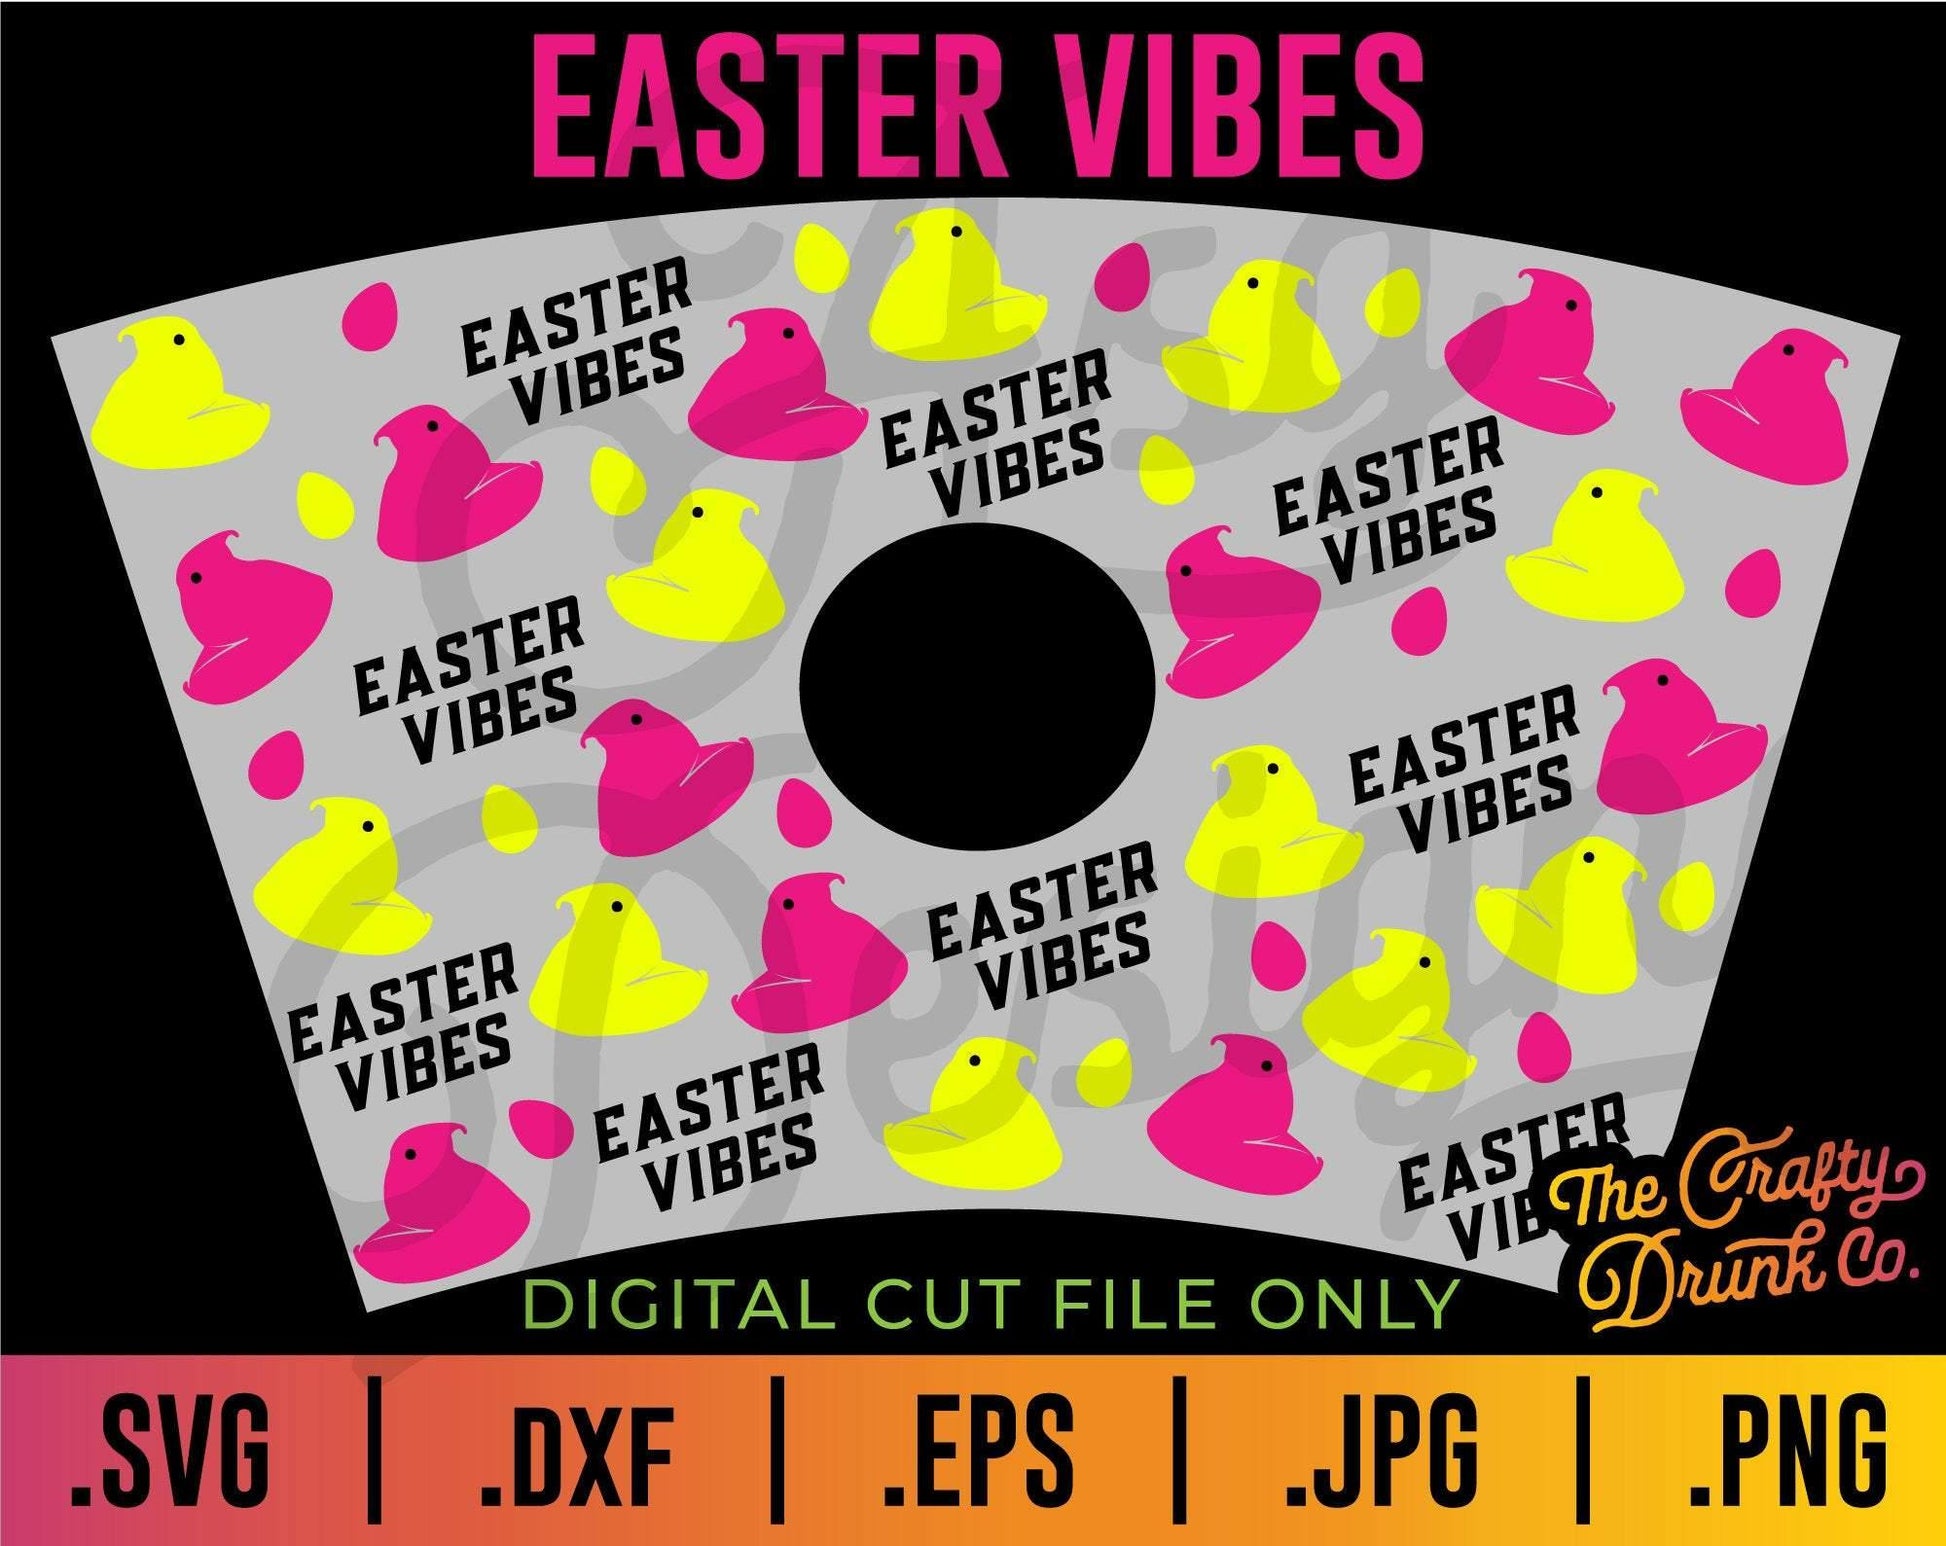 Easter Vibes Starbucks Cup Wrap SVG - TheCraftyDrunkCo